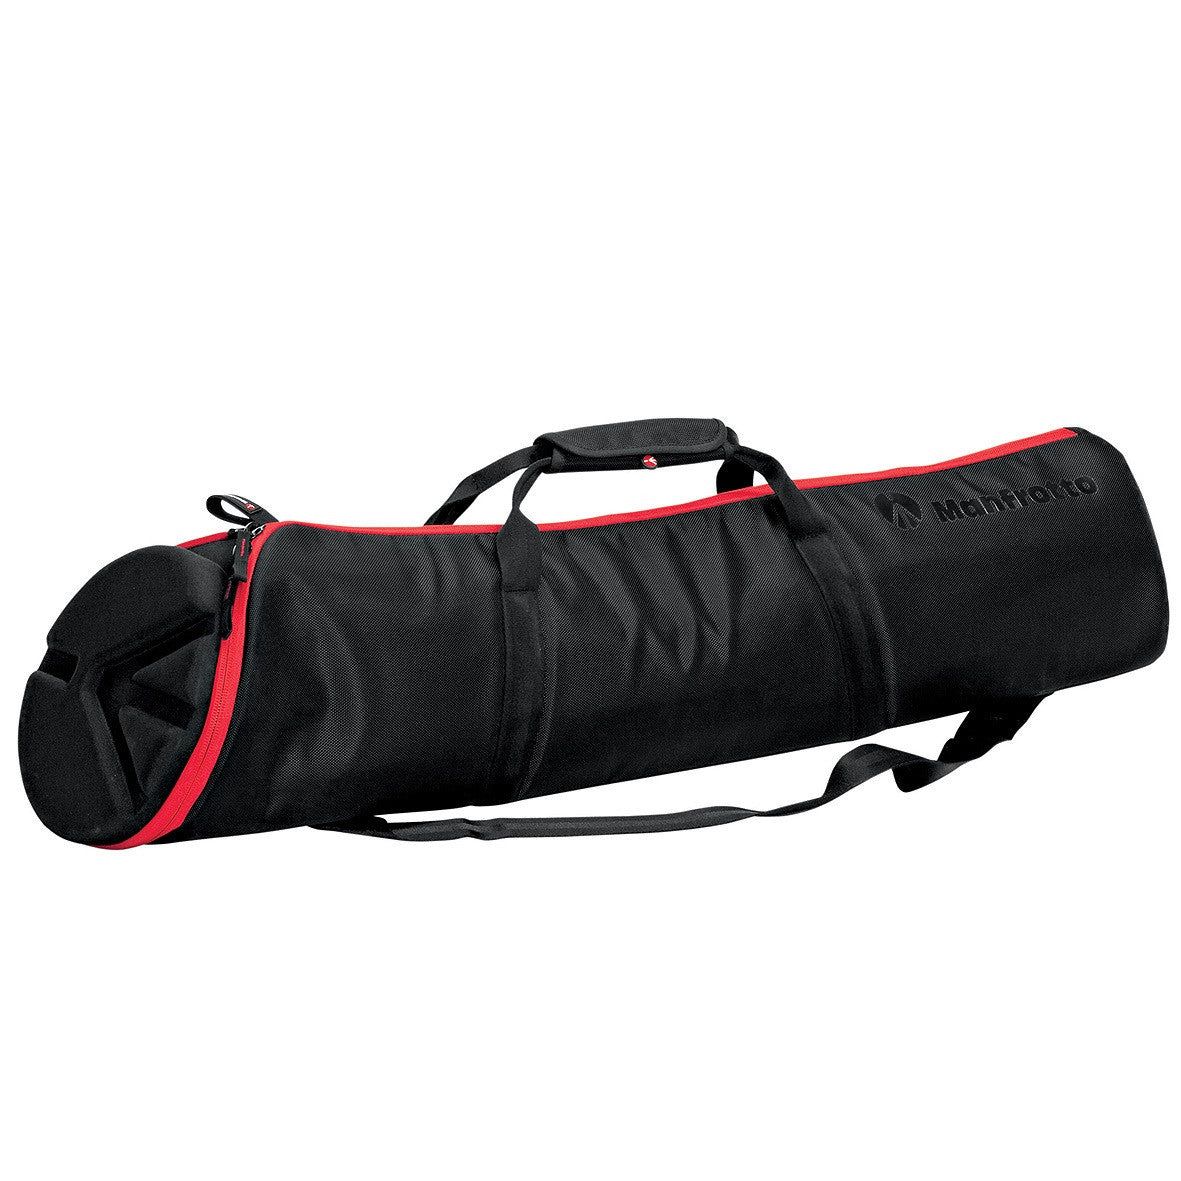 Manfrotto MBAG100PN Padded Tripod Bag 39.3"", bags tripod bags, Manfrotto - Pictureline 